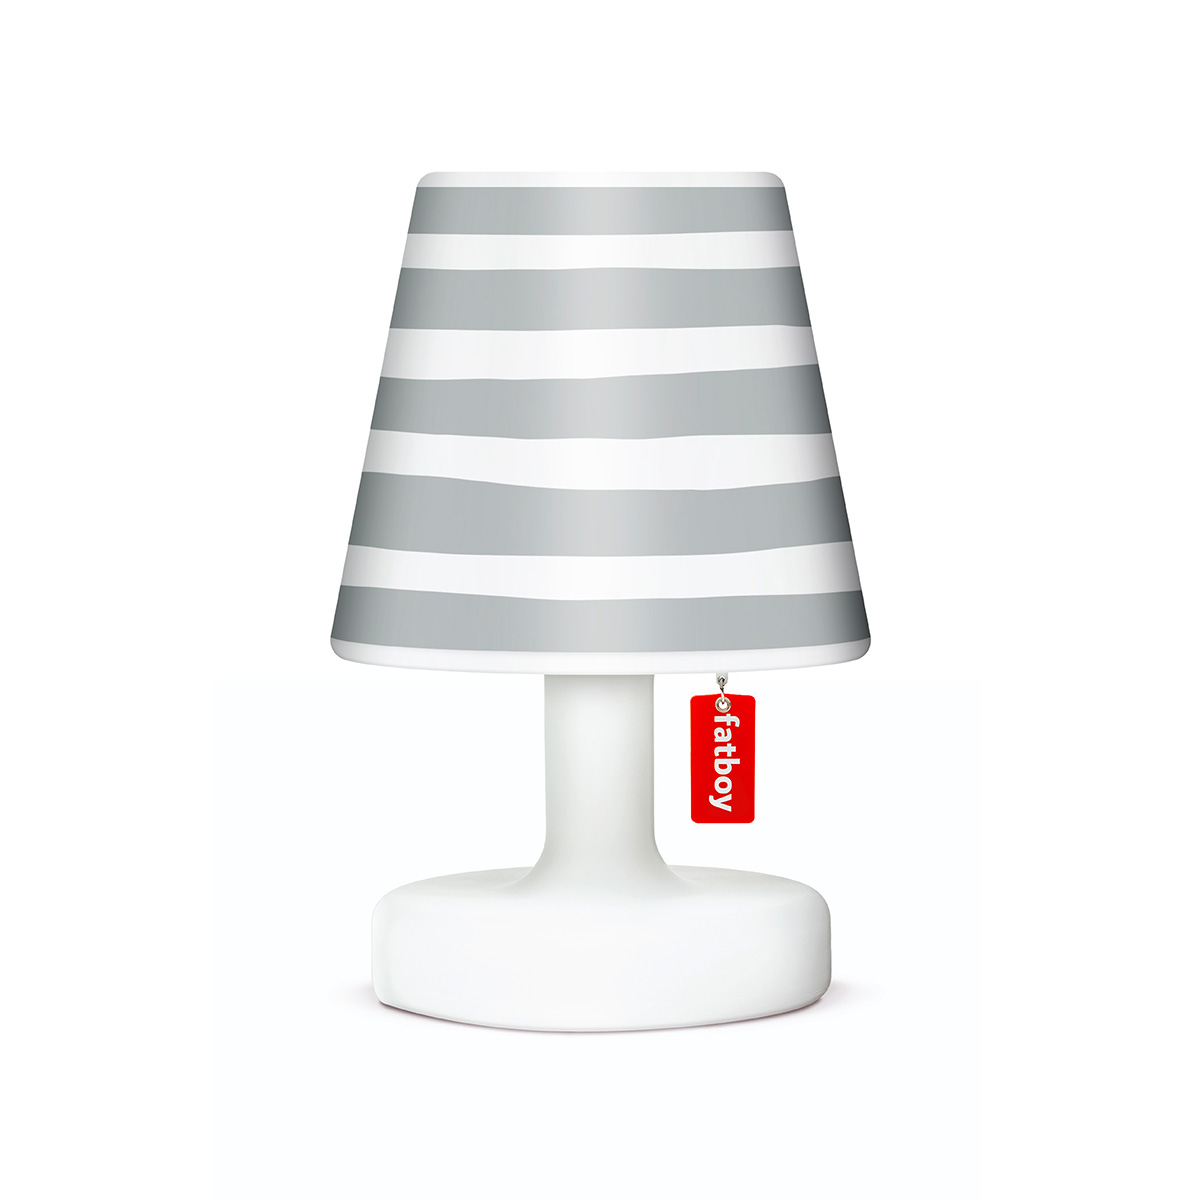 Fatboy Cooper Cappie Lampshade Mr Grey, Grey Lampshade For Table Lamp